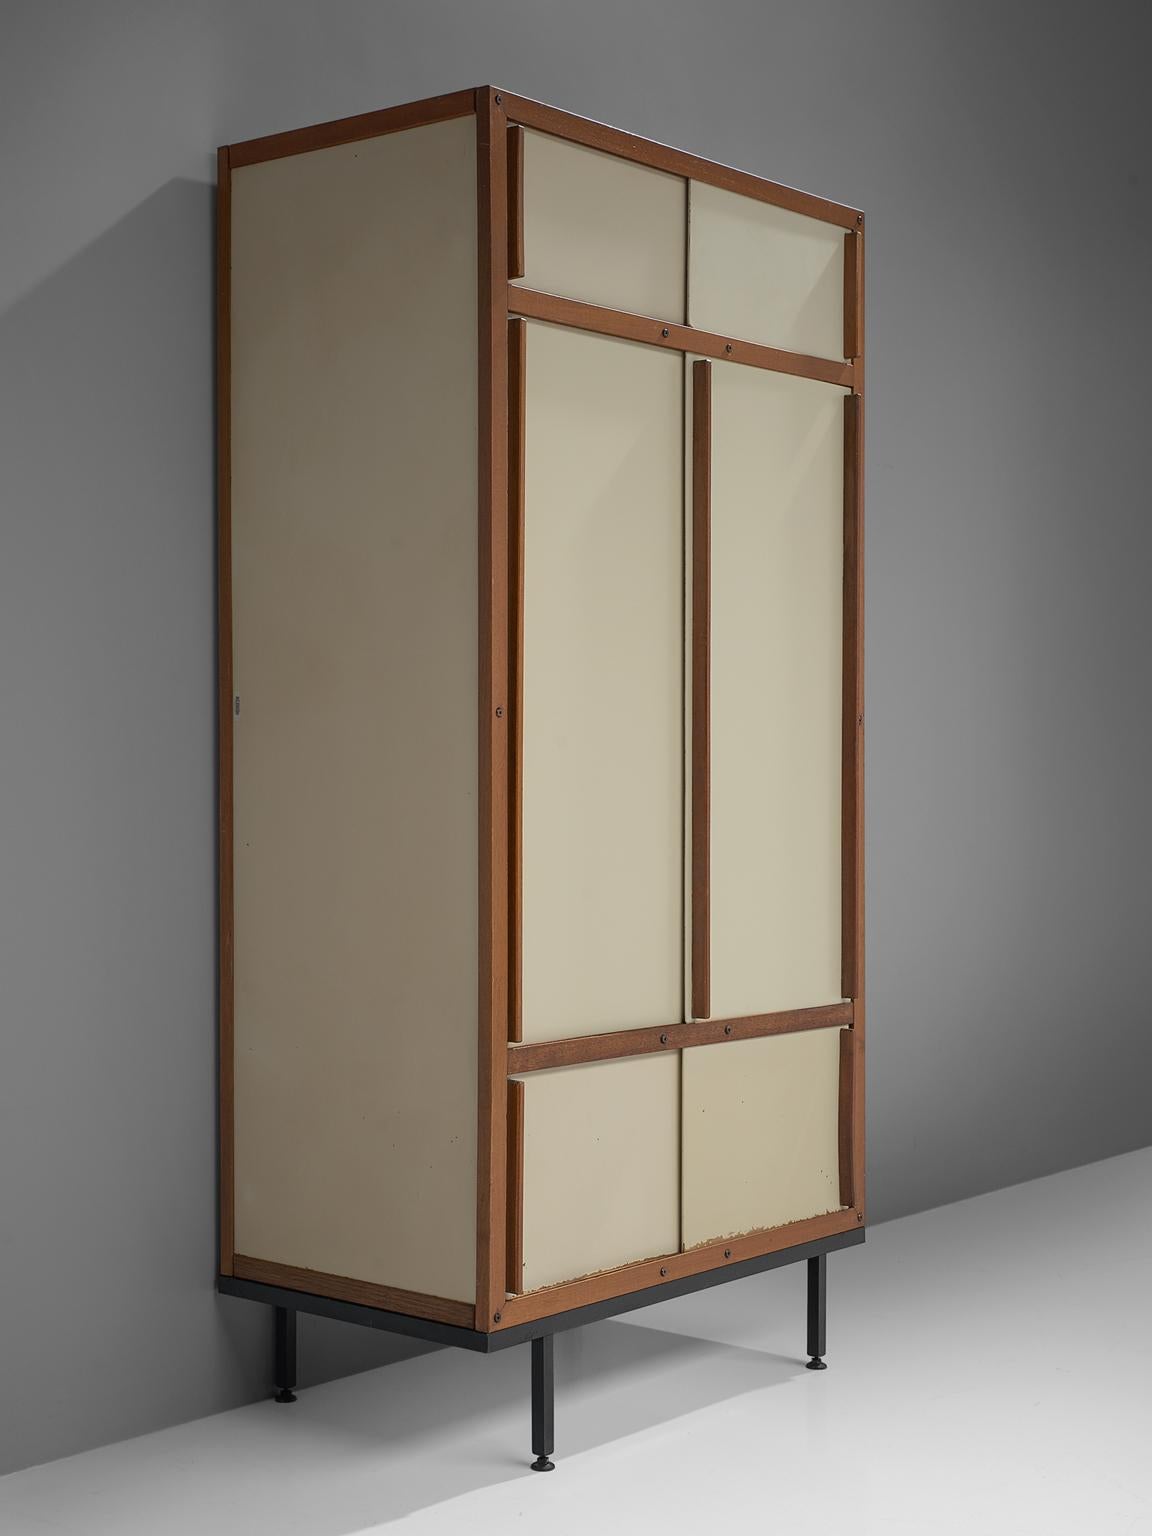 André Sornay for Atelier Sornay, pair of cabinets, honduras mahogany and metal, France, circa 1960.

French midcentury modernist armoires by the Avant grade creator Andre Sornay. The wooden front panels form a dynamic geometric abstraction in